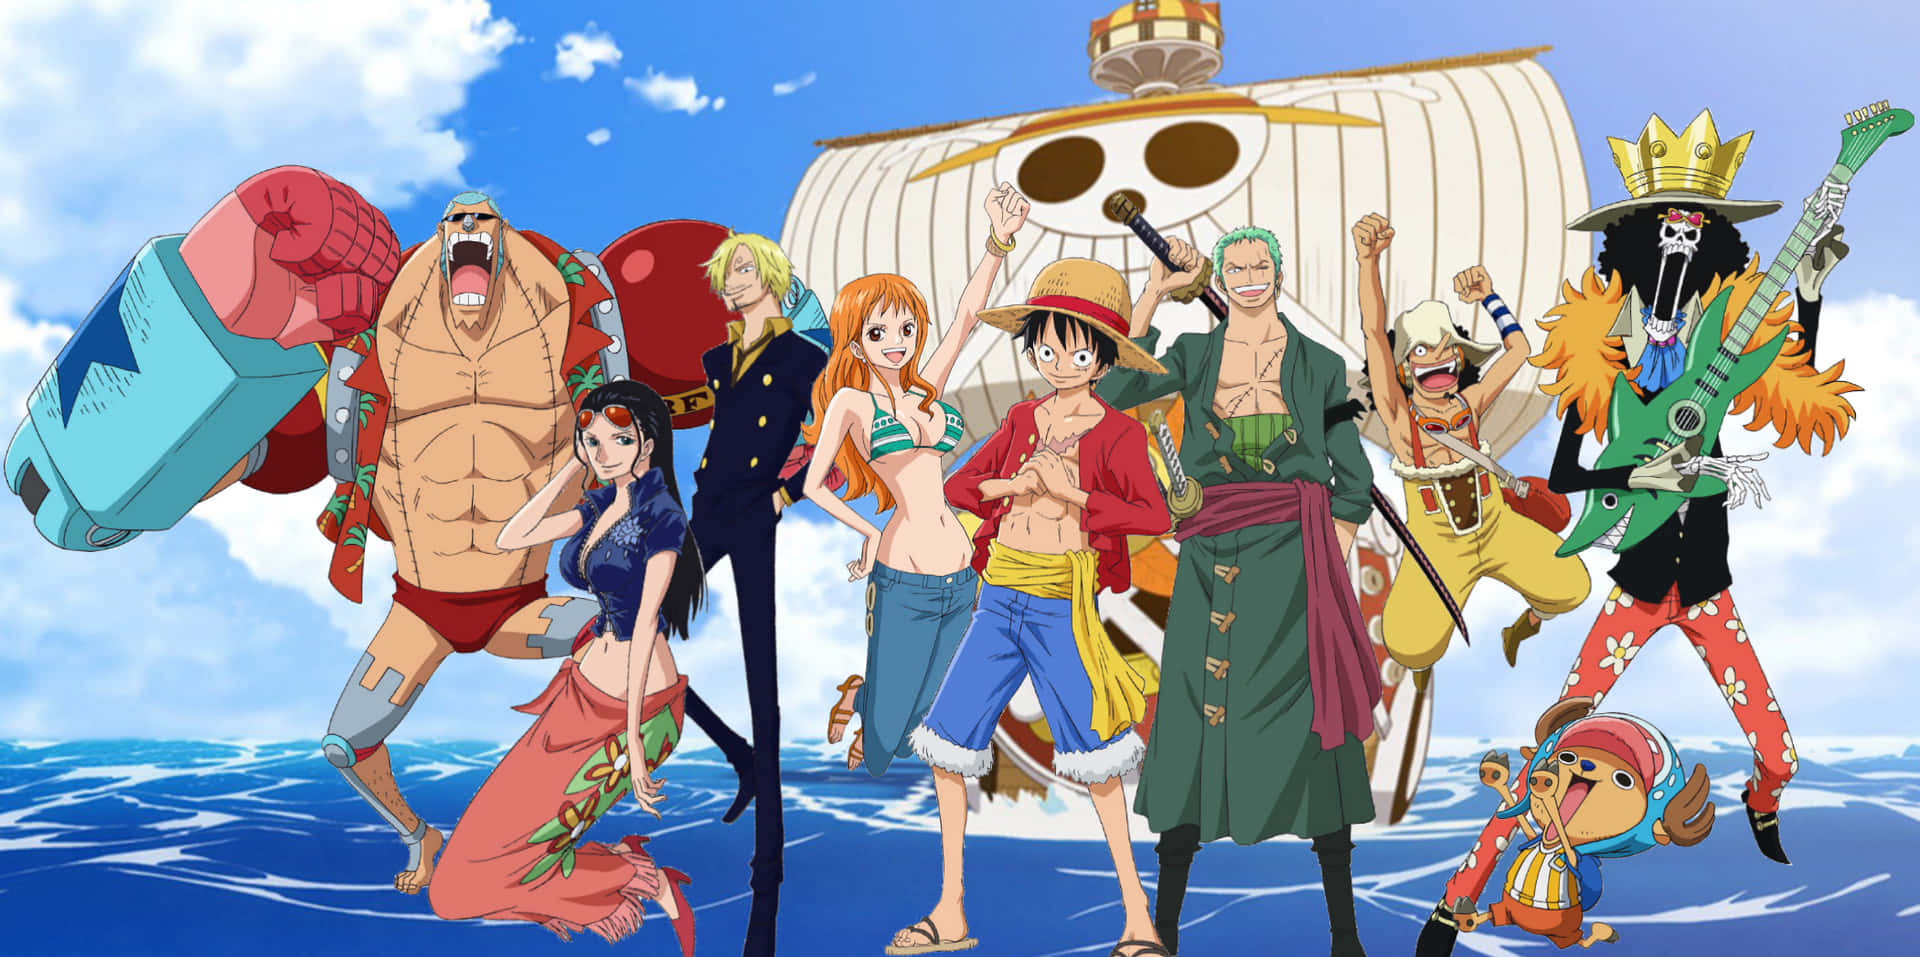 The Straw Hat Pirates set sail on their grand voyage to find One Piece! Wallpaper